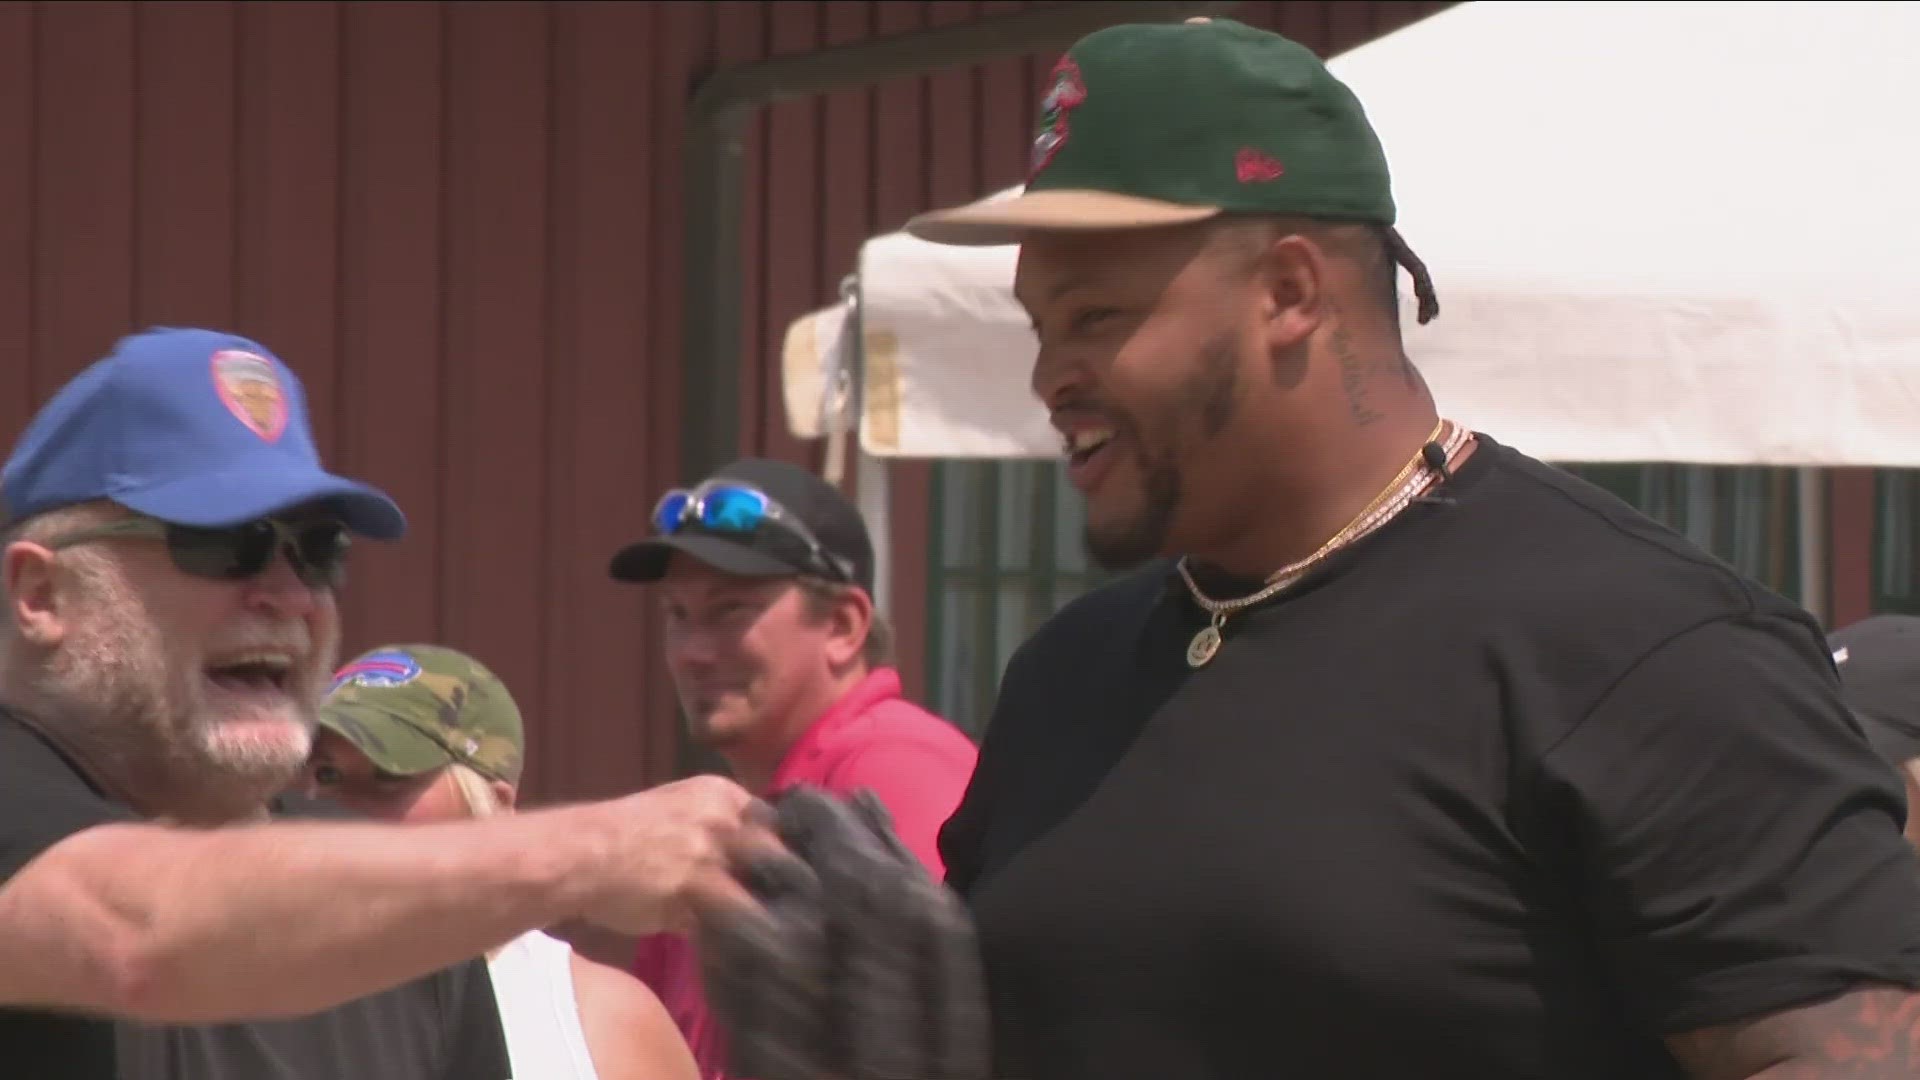 Buffalo Bills offensive lineman Dion Dawkins hosted a charity cornhole tournament, raising money for his Dion's Dreamers foundation.